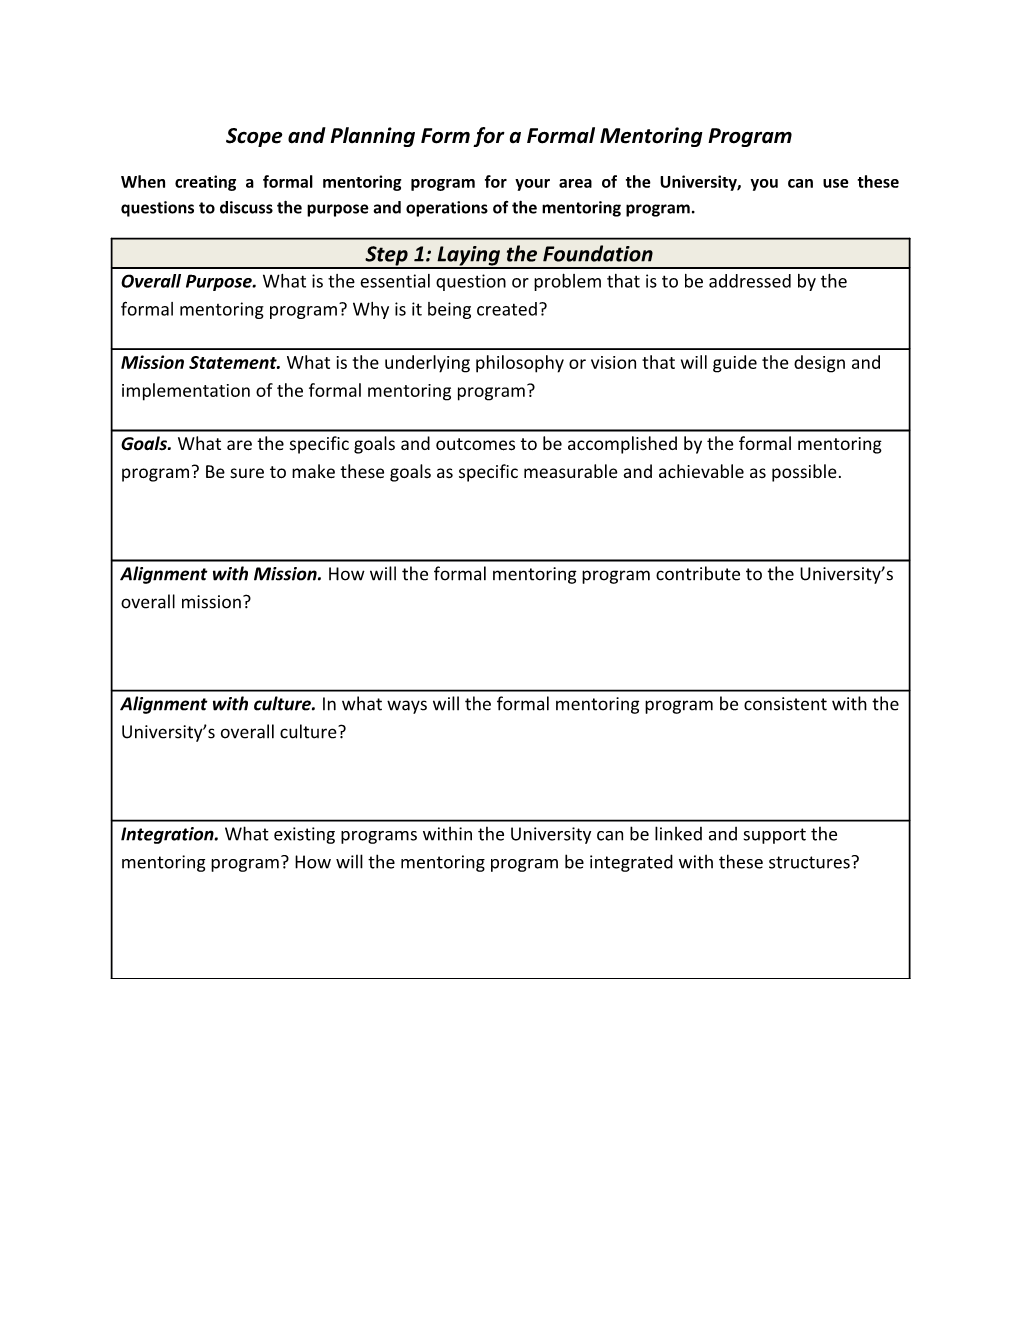 Scope and Planning Form for a Formal Mentoring Program